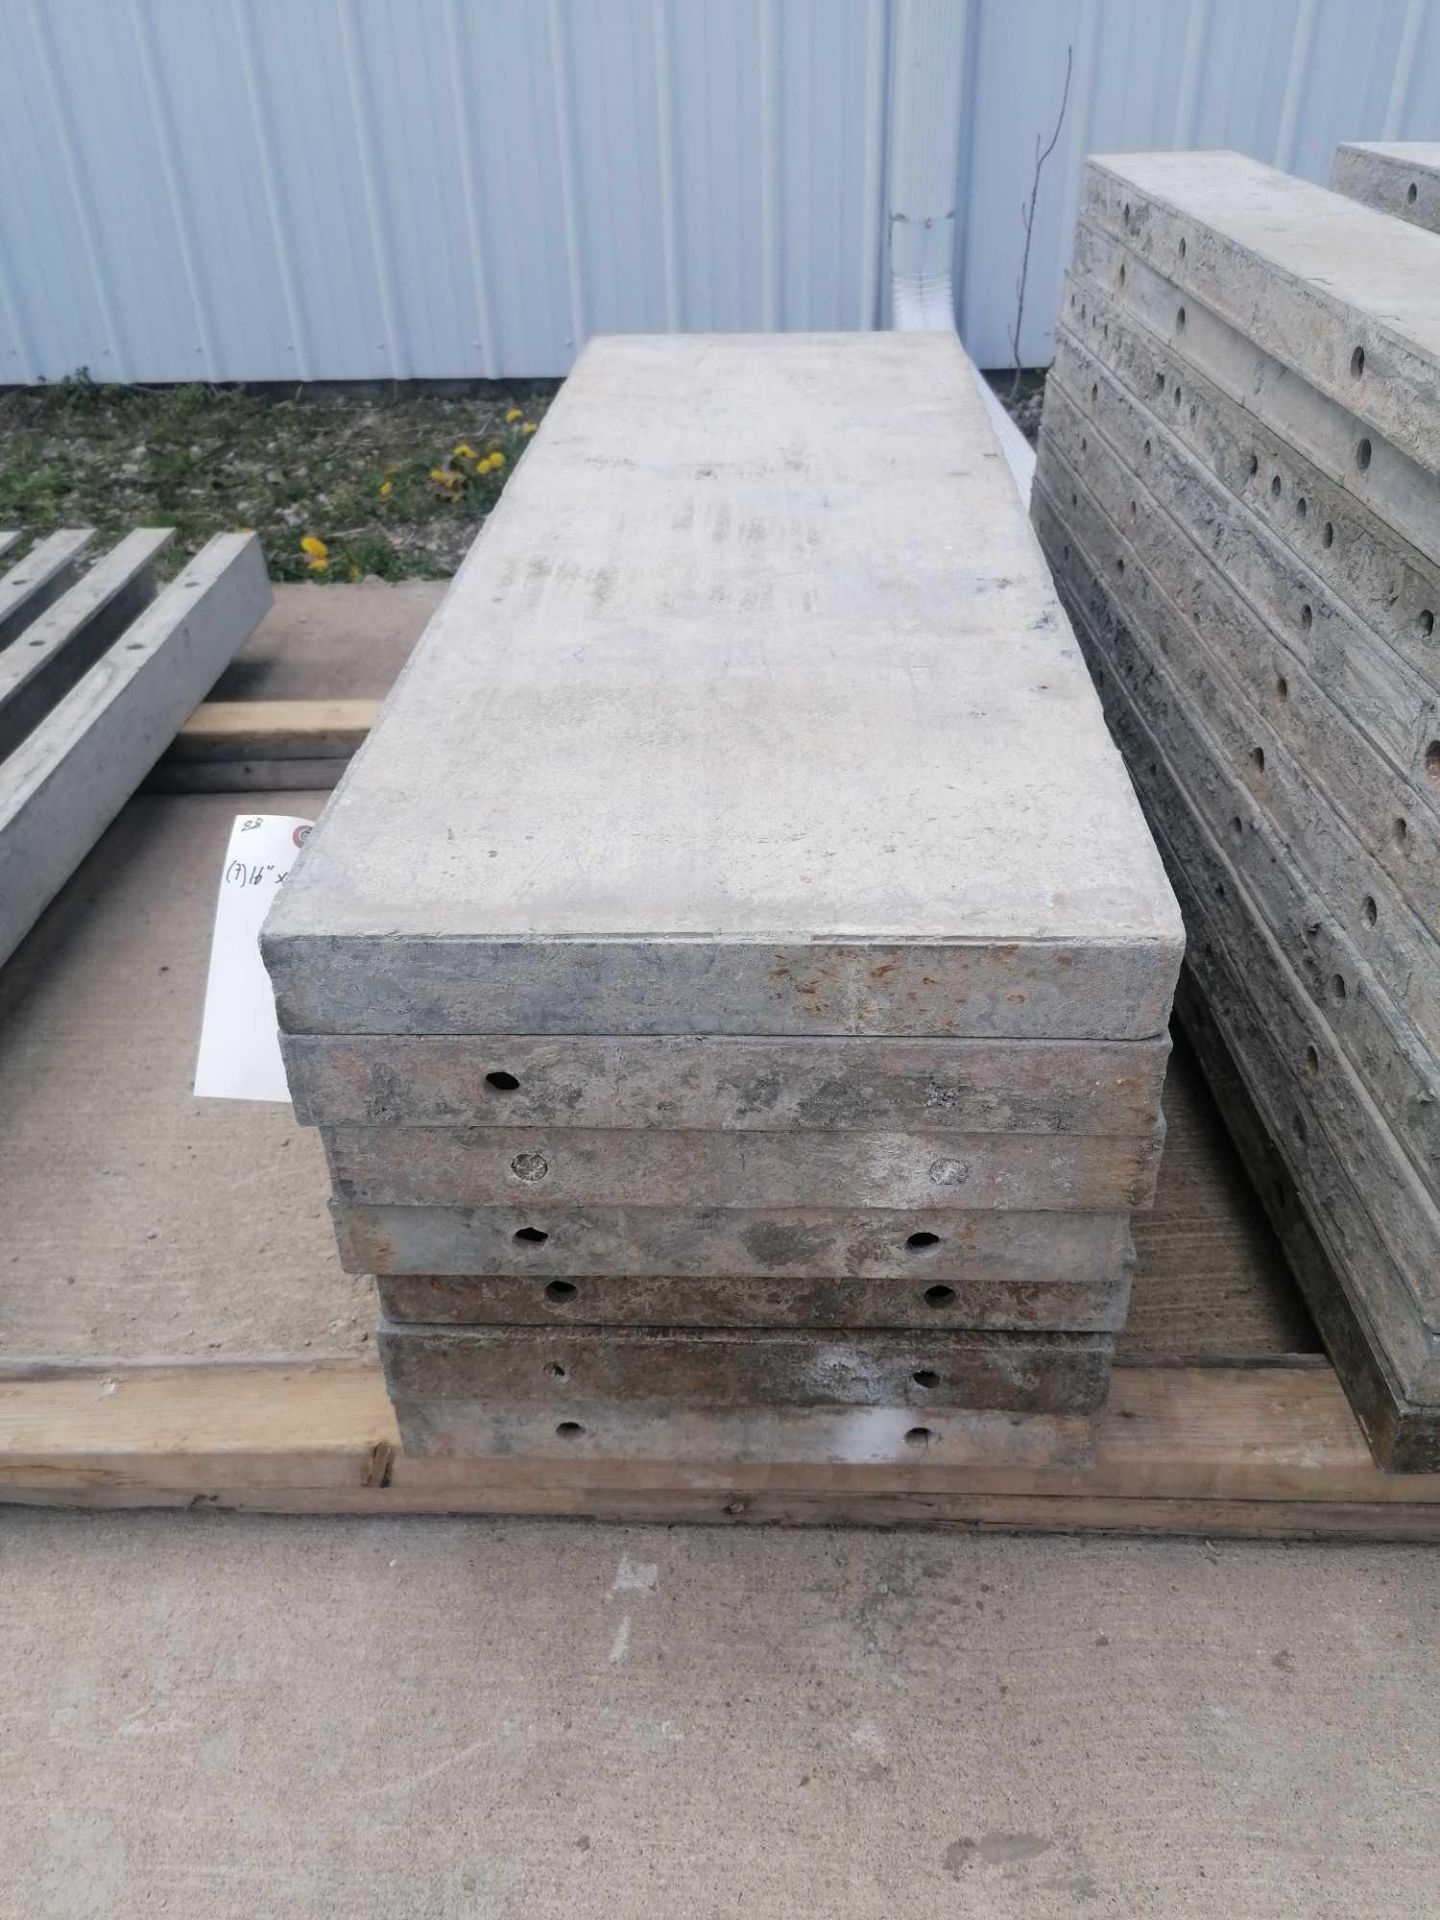 (7) 16" x 4' Durand Aluminum Concrete Forms, Smooth 8" Hole Pattern. Located at 301 E Henry